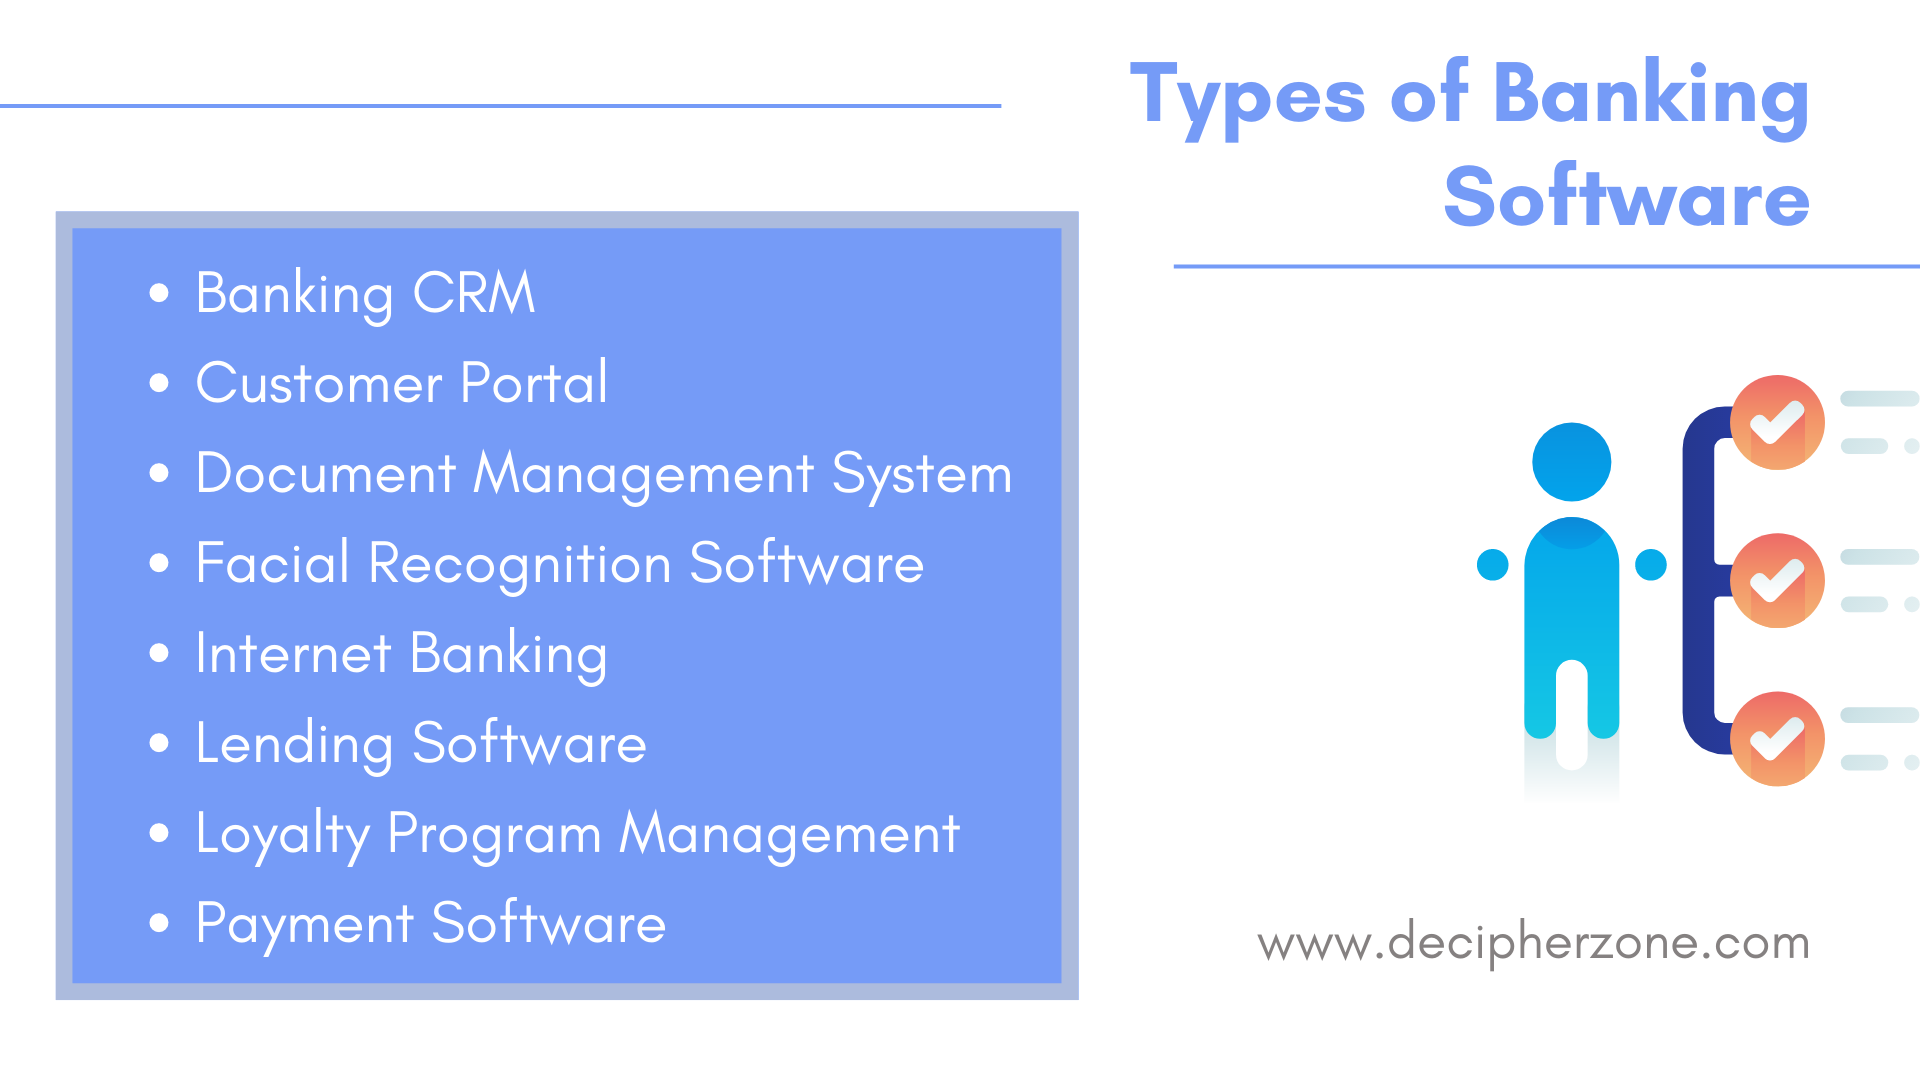 Types of Banking Software